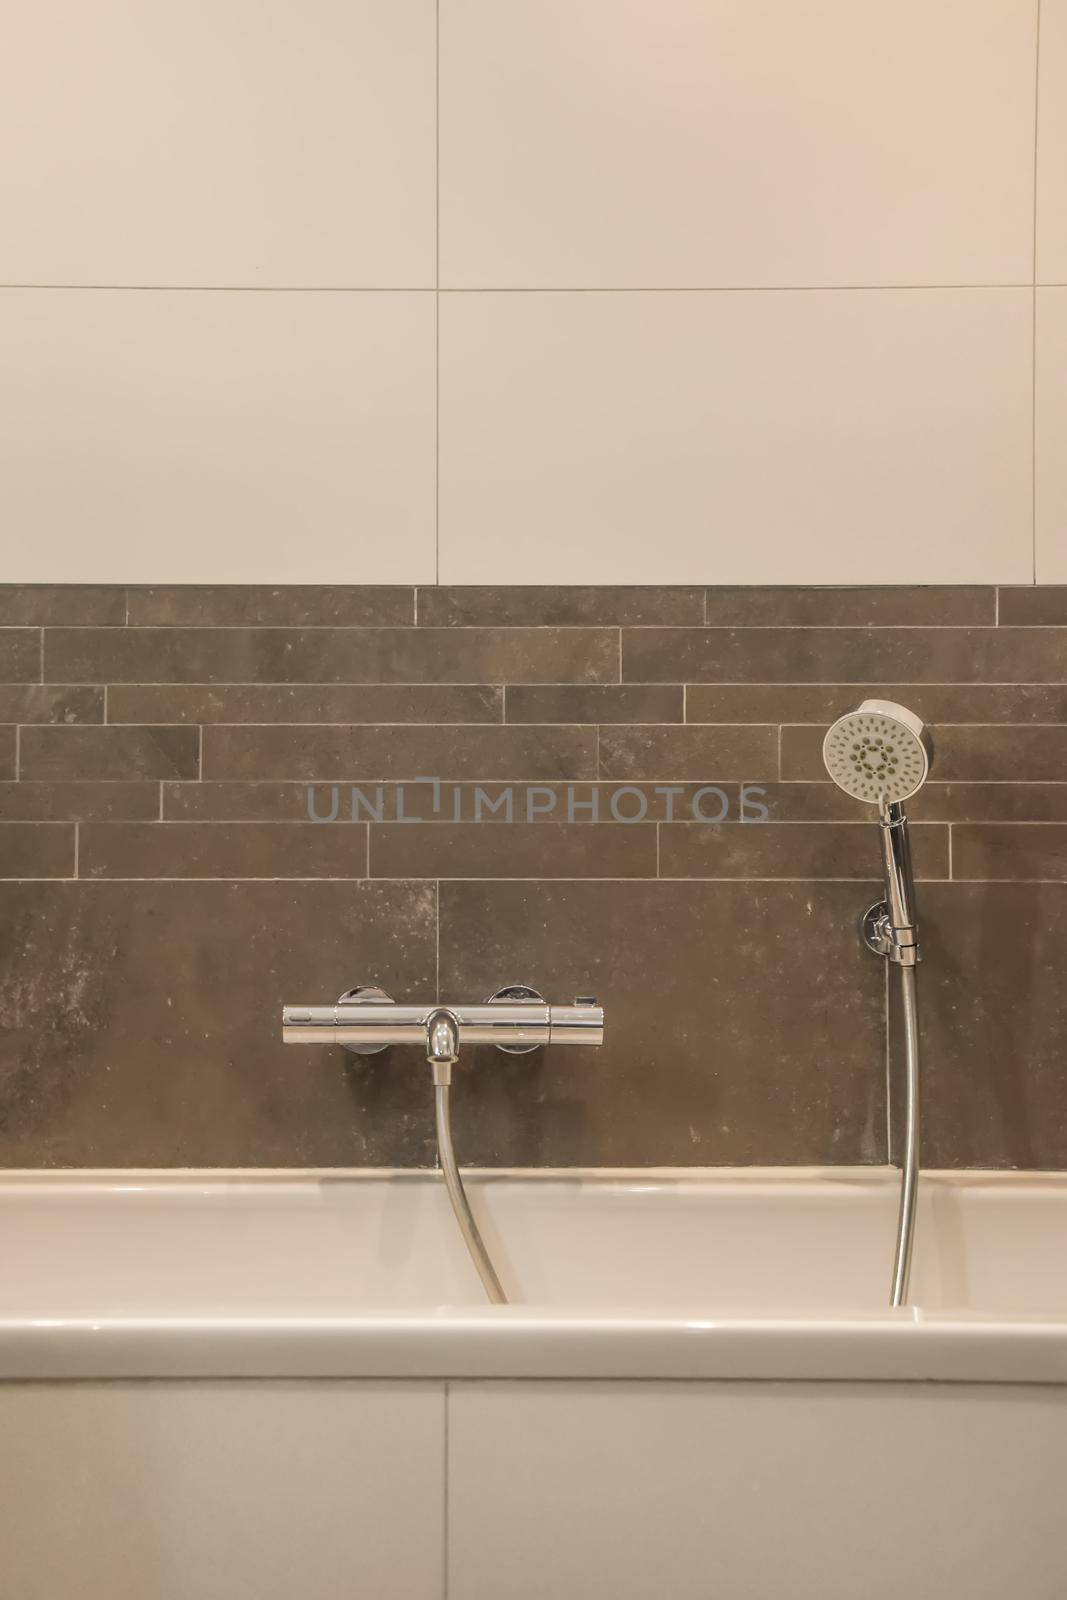 The interior of a bathroom in a modern house decorated with tiles with a bathtub